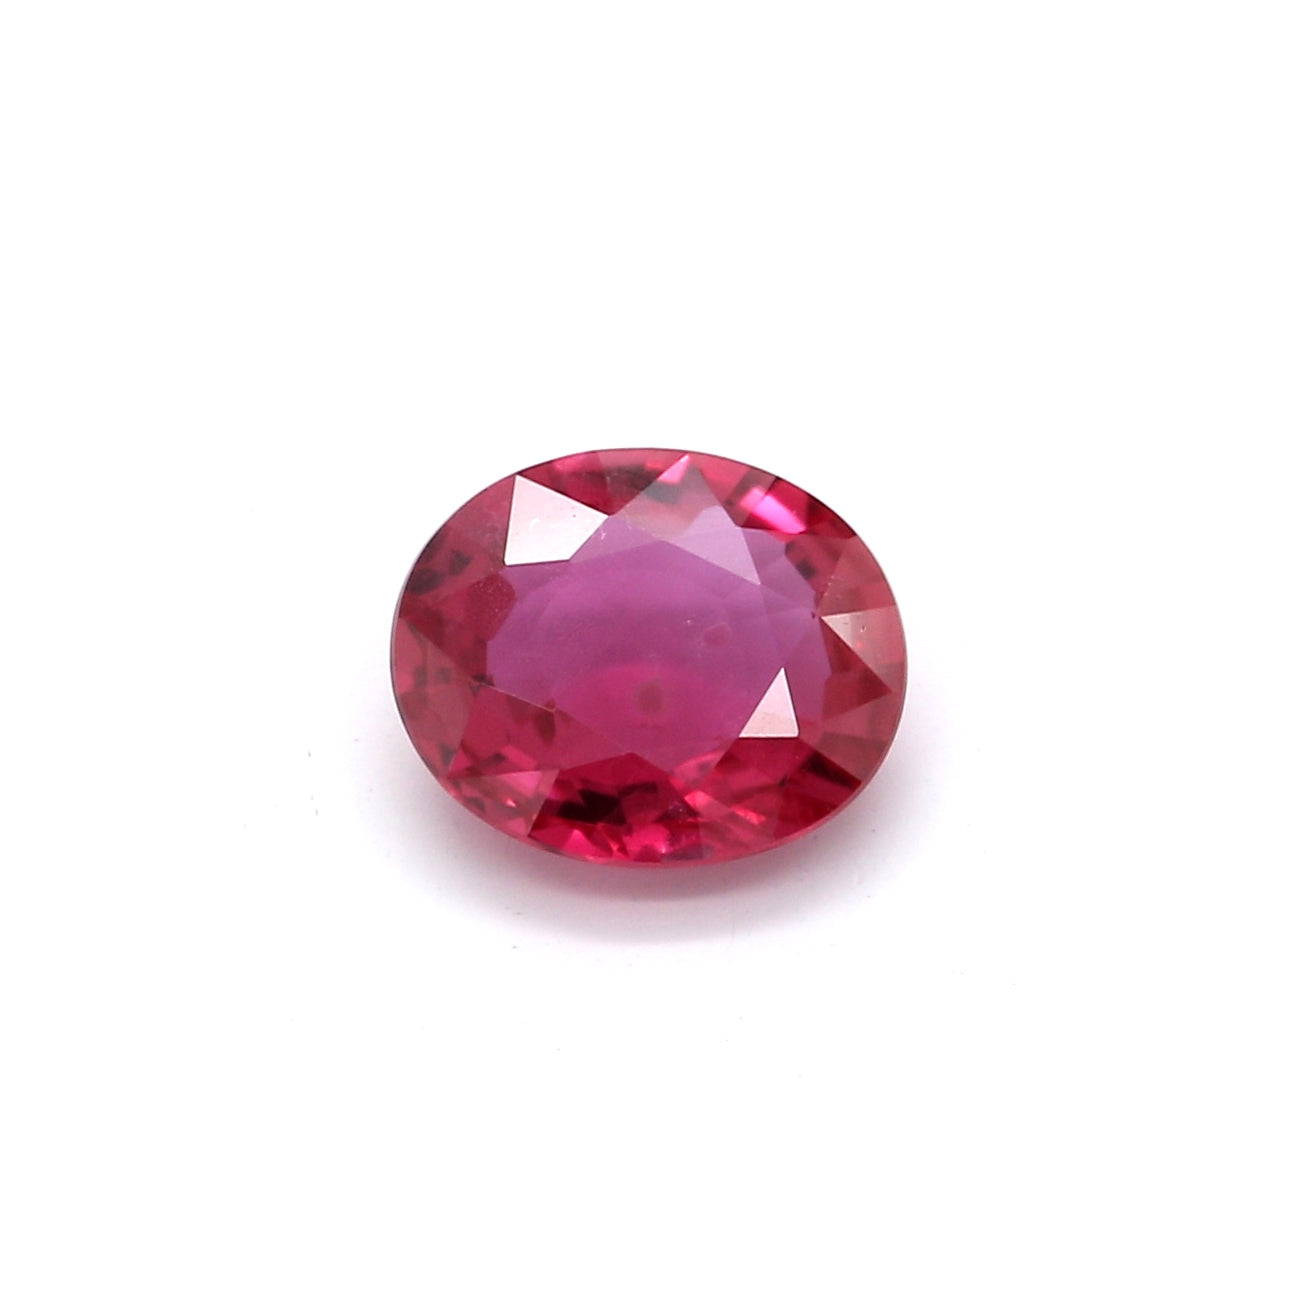 0.66ct Pinkish Red, Oval Ruby, H(b), Thailand - 5.98 x 5.09 x 2.39mm